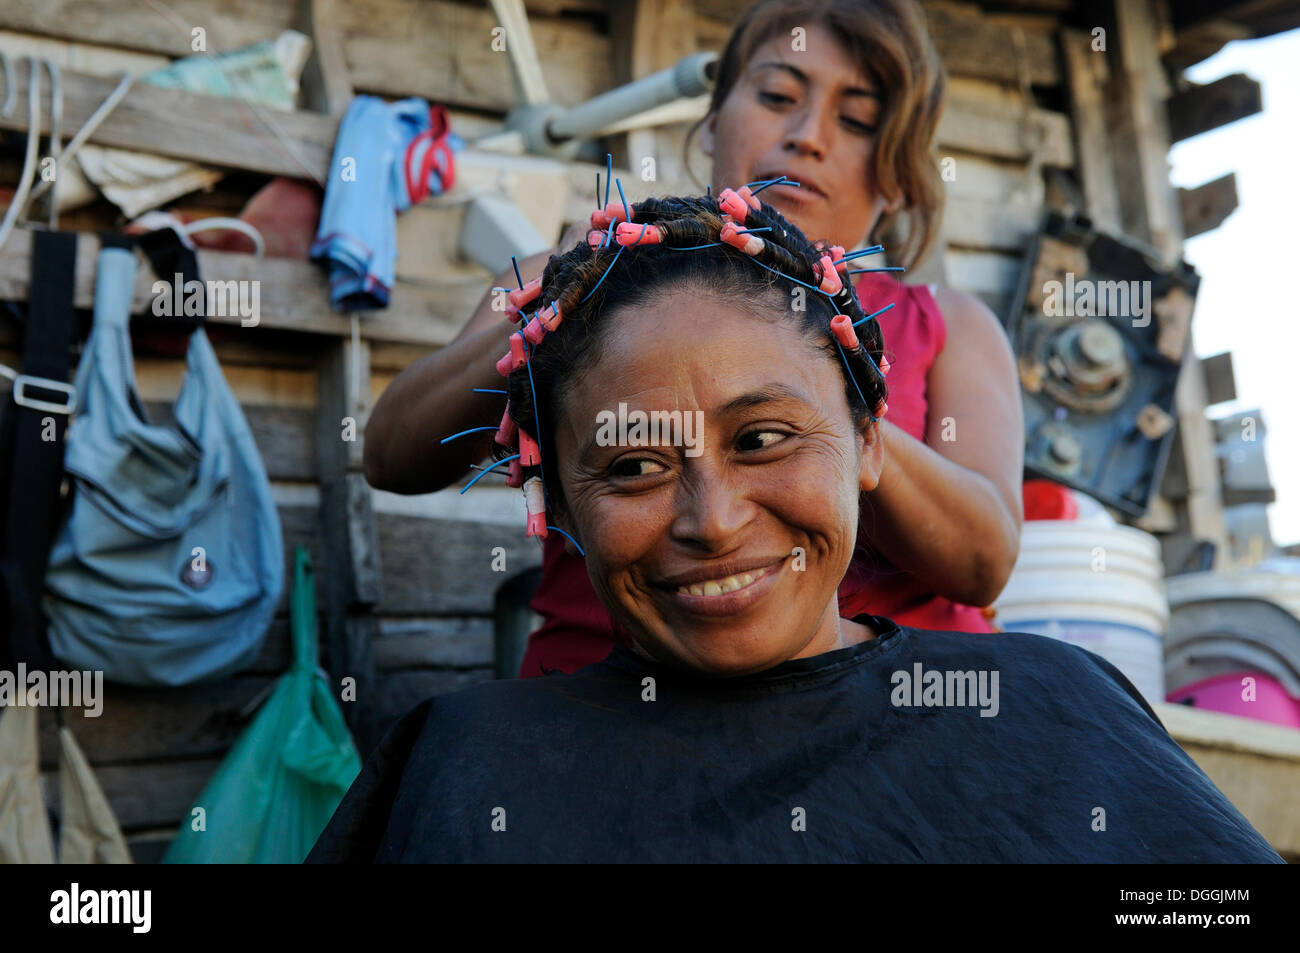 Woman doing another woman's hair in front of her hut, customer is 40 years old, in a poor neighborhood, Cancun Stock Photo